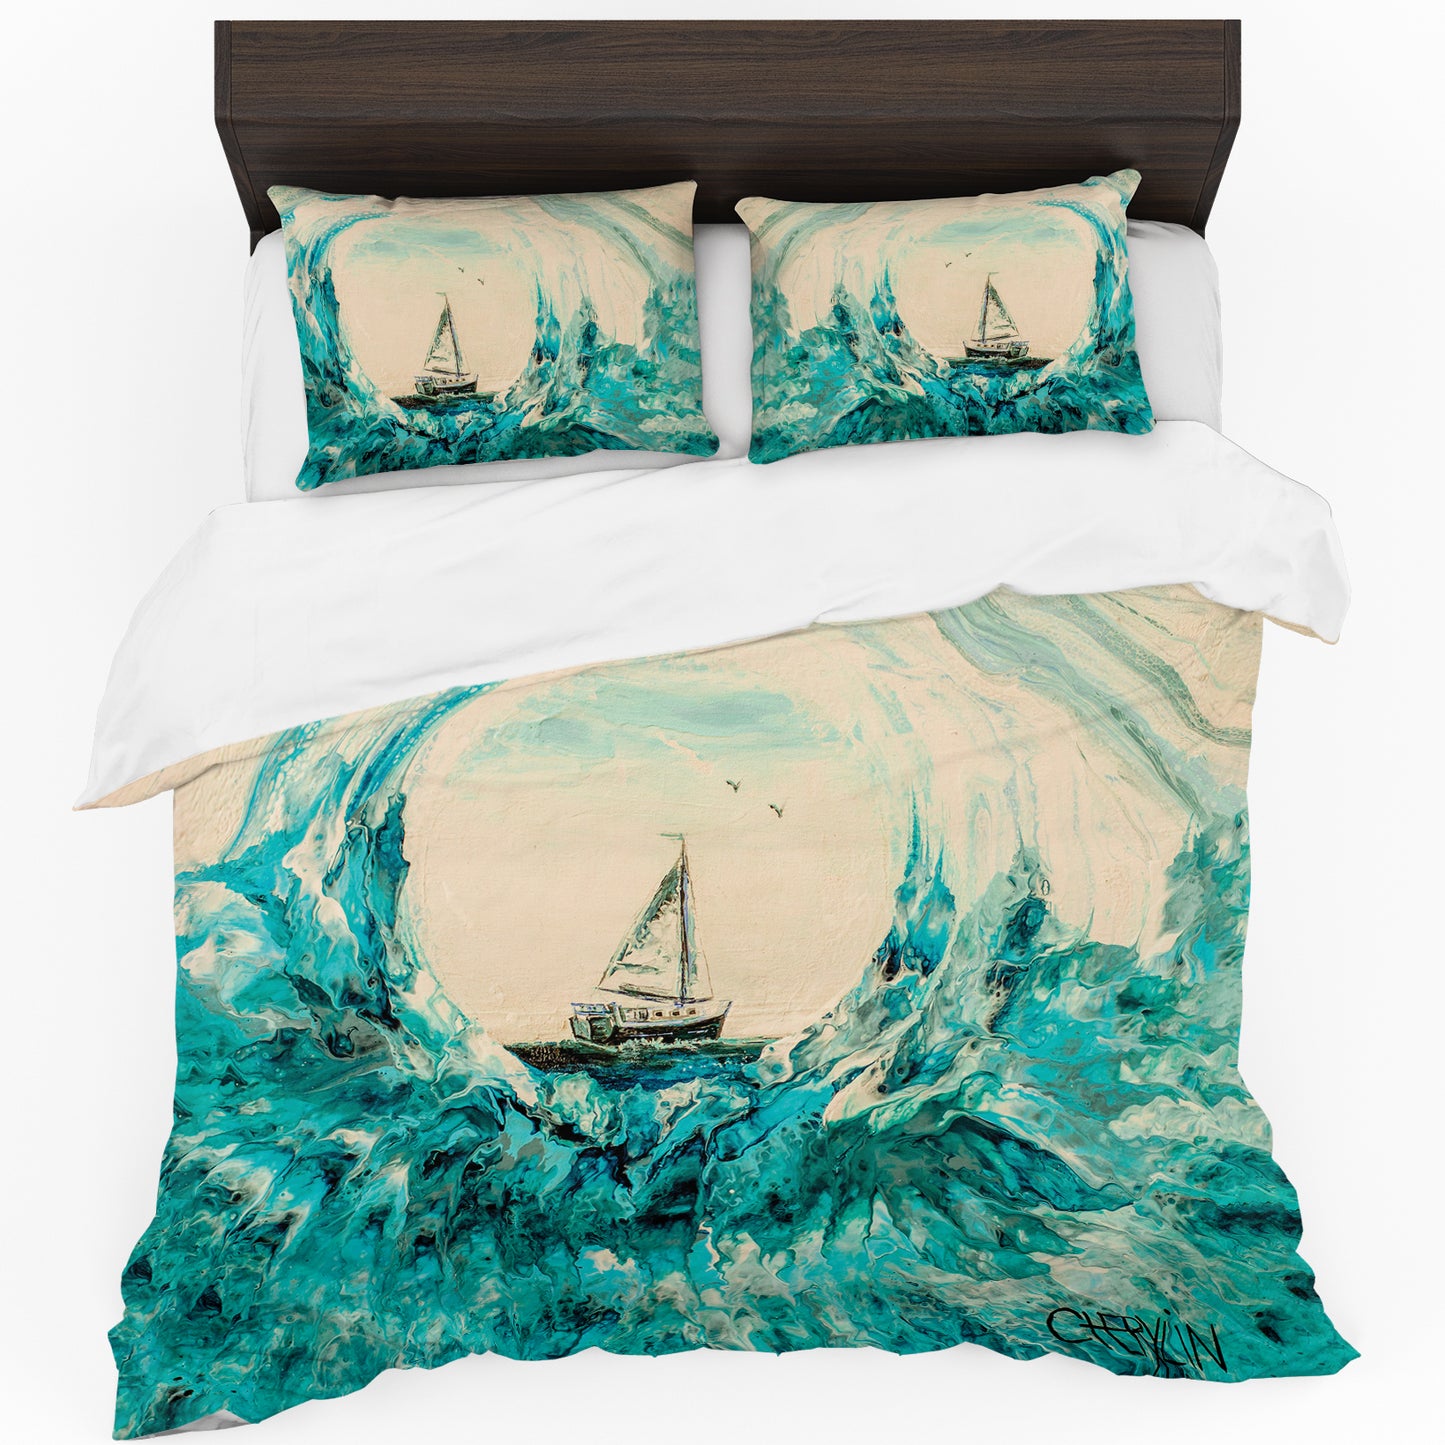 Through The Looking Glass Duvet Cover Set by Cherylin Louw